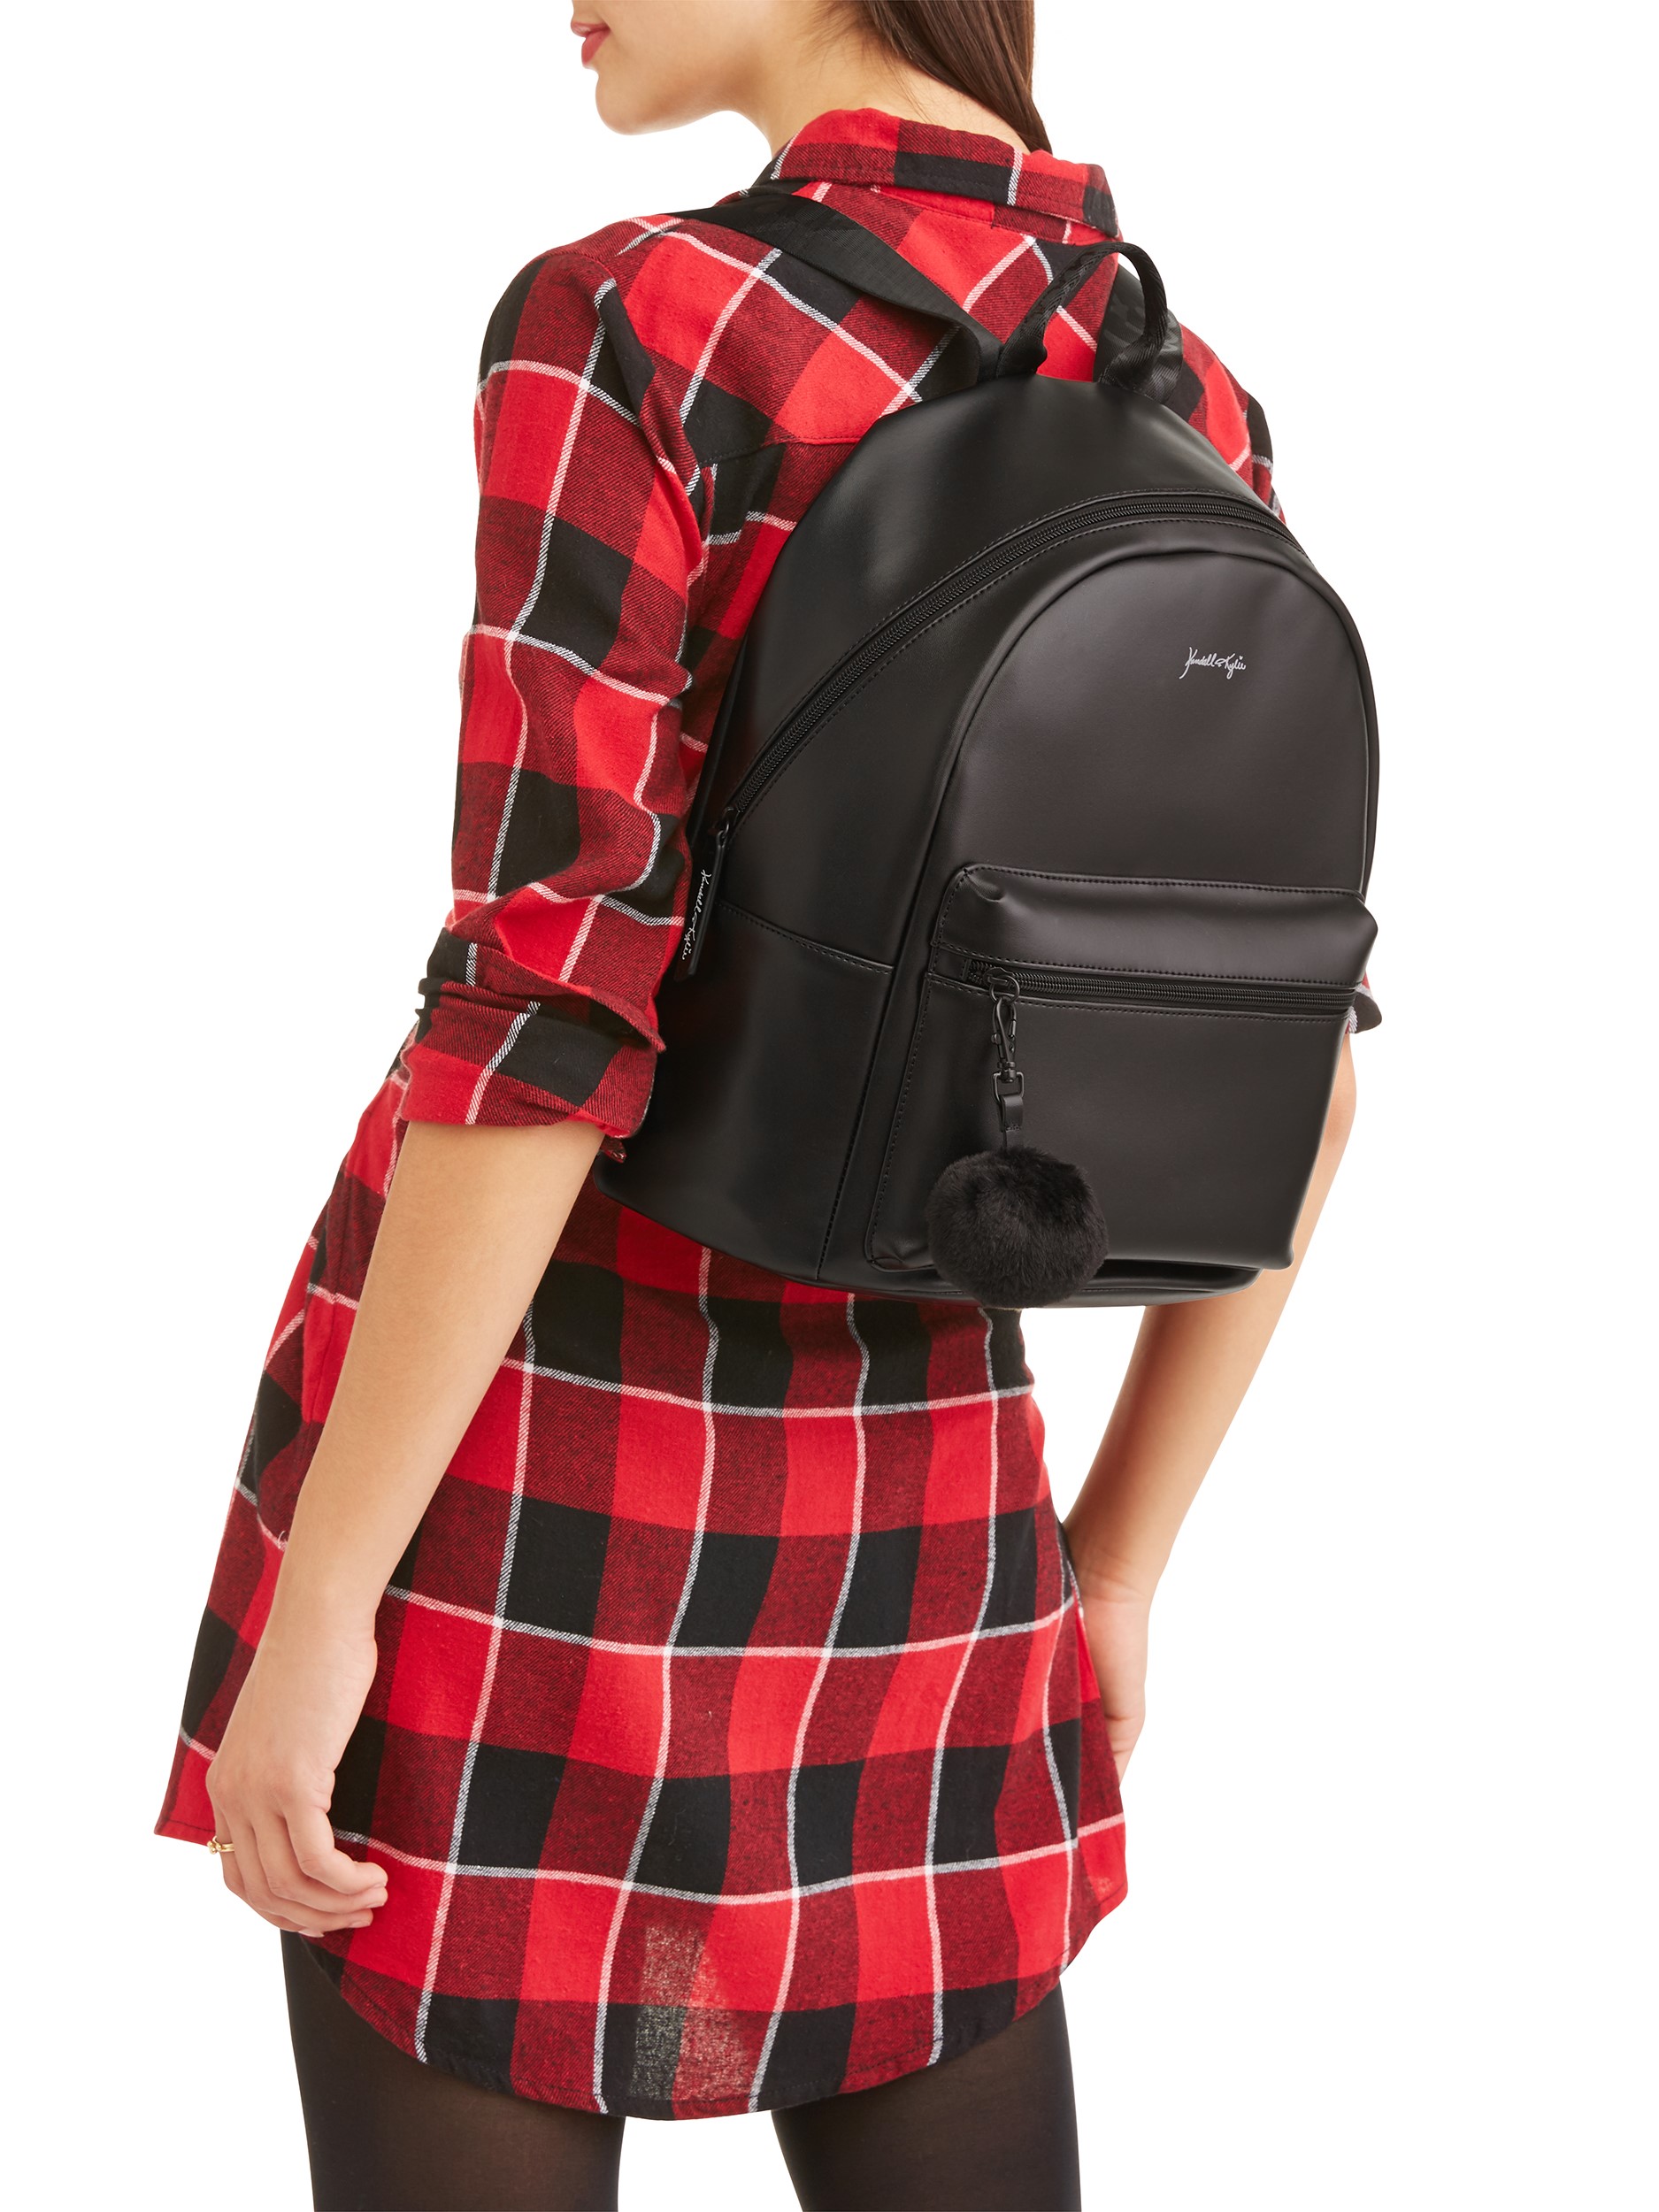 Kendall + Kylie for Walmart Large Backpack with Pom - image 1 of 5